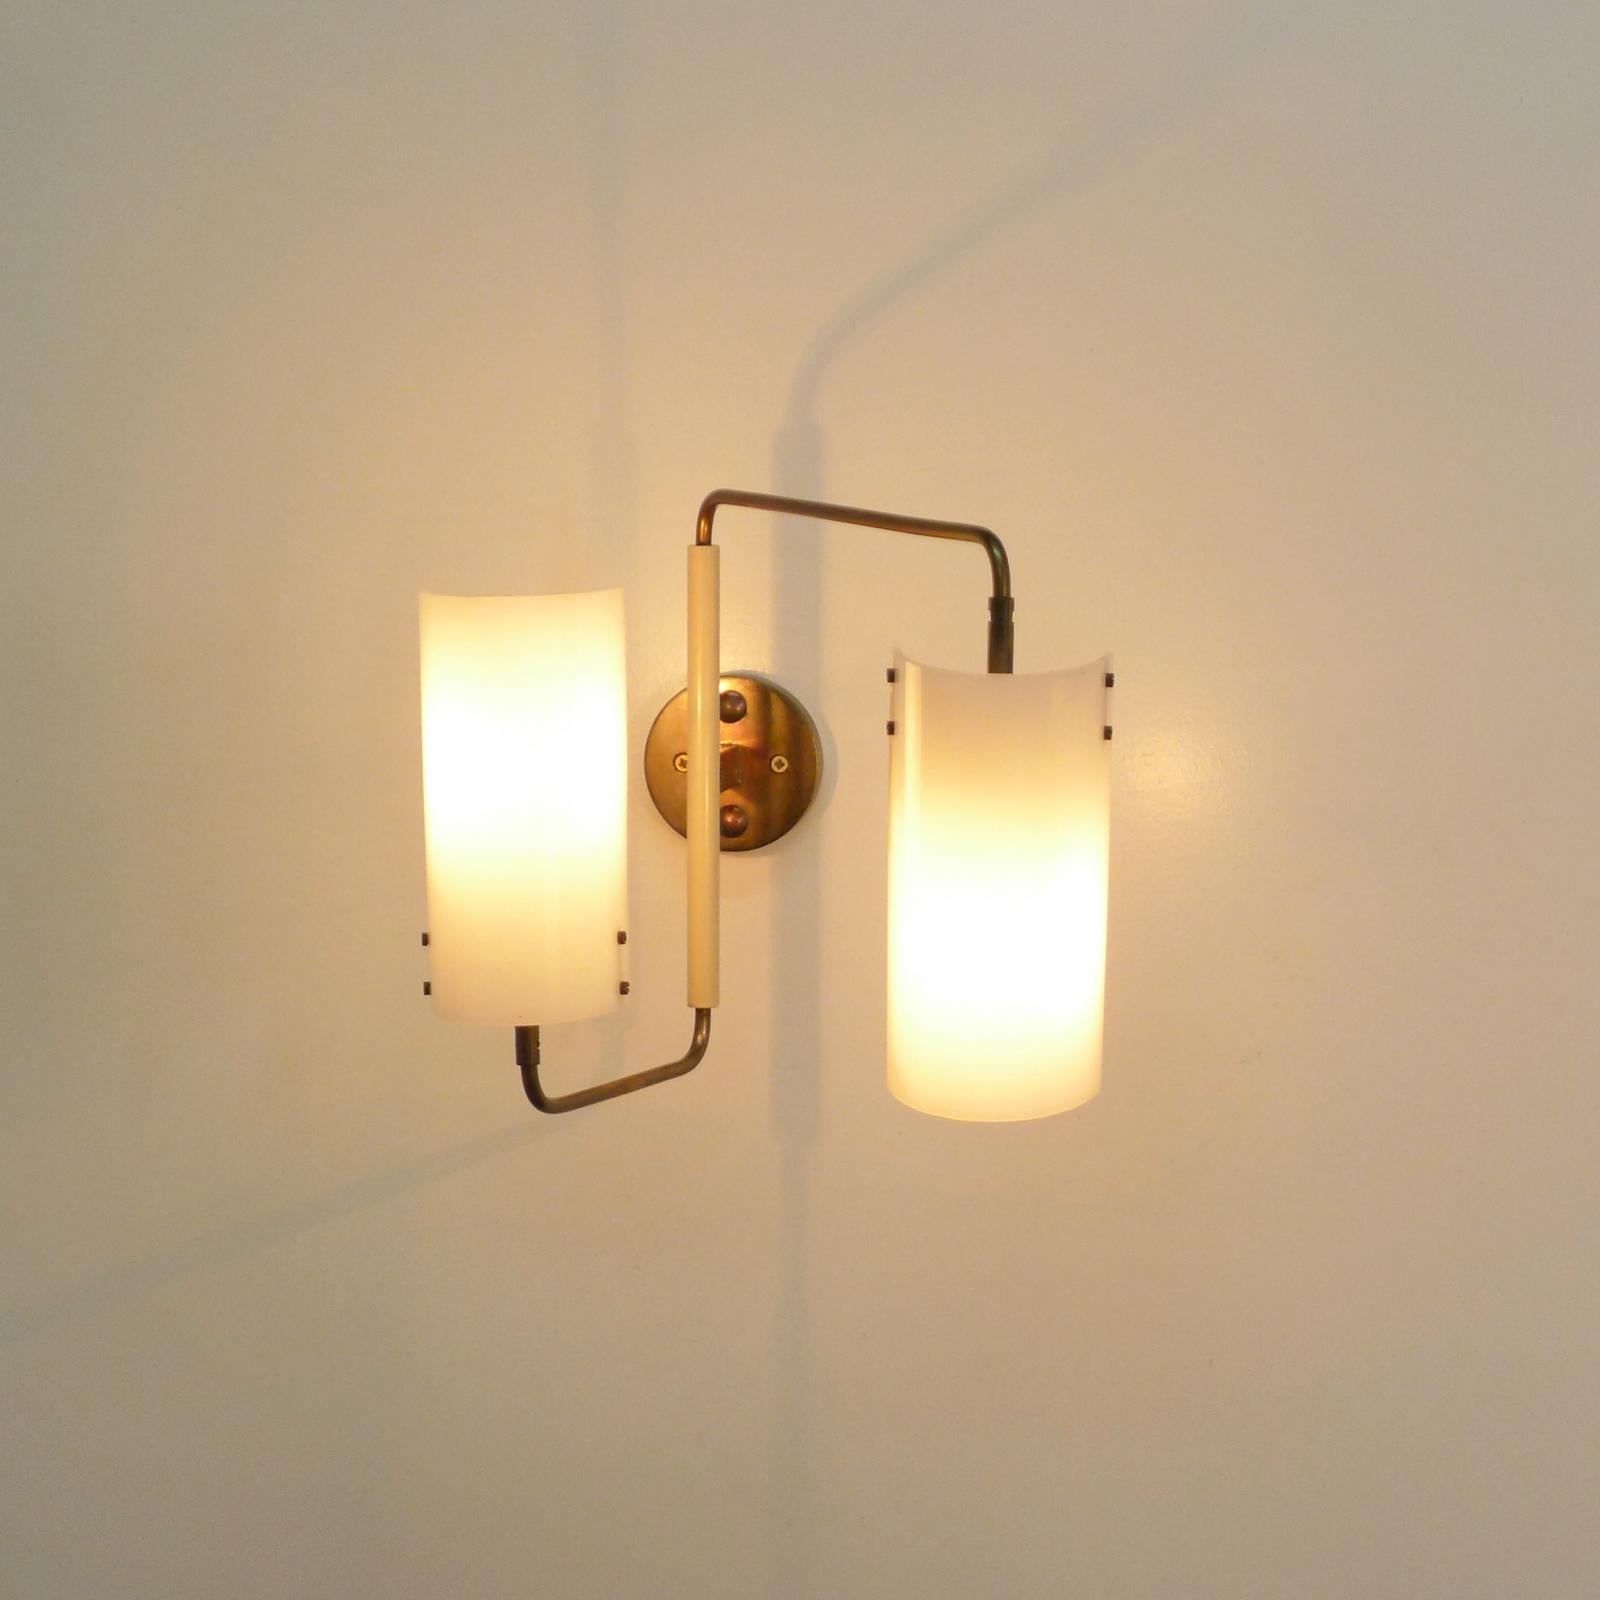 Mid-Century Modern Pair of Oluce Twin-Shade Adjustable Wall Lights, Designed by Tito Agnoli, 1955 For Sale